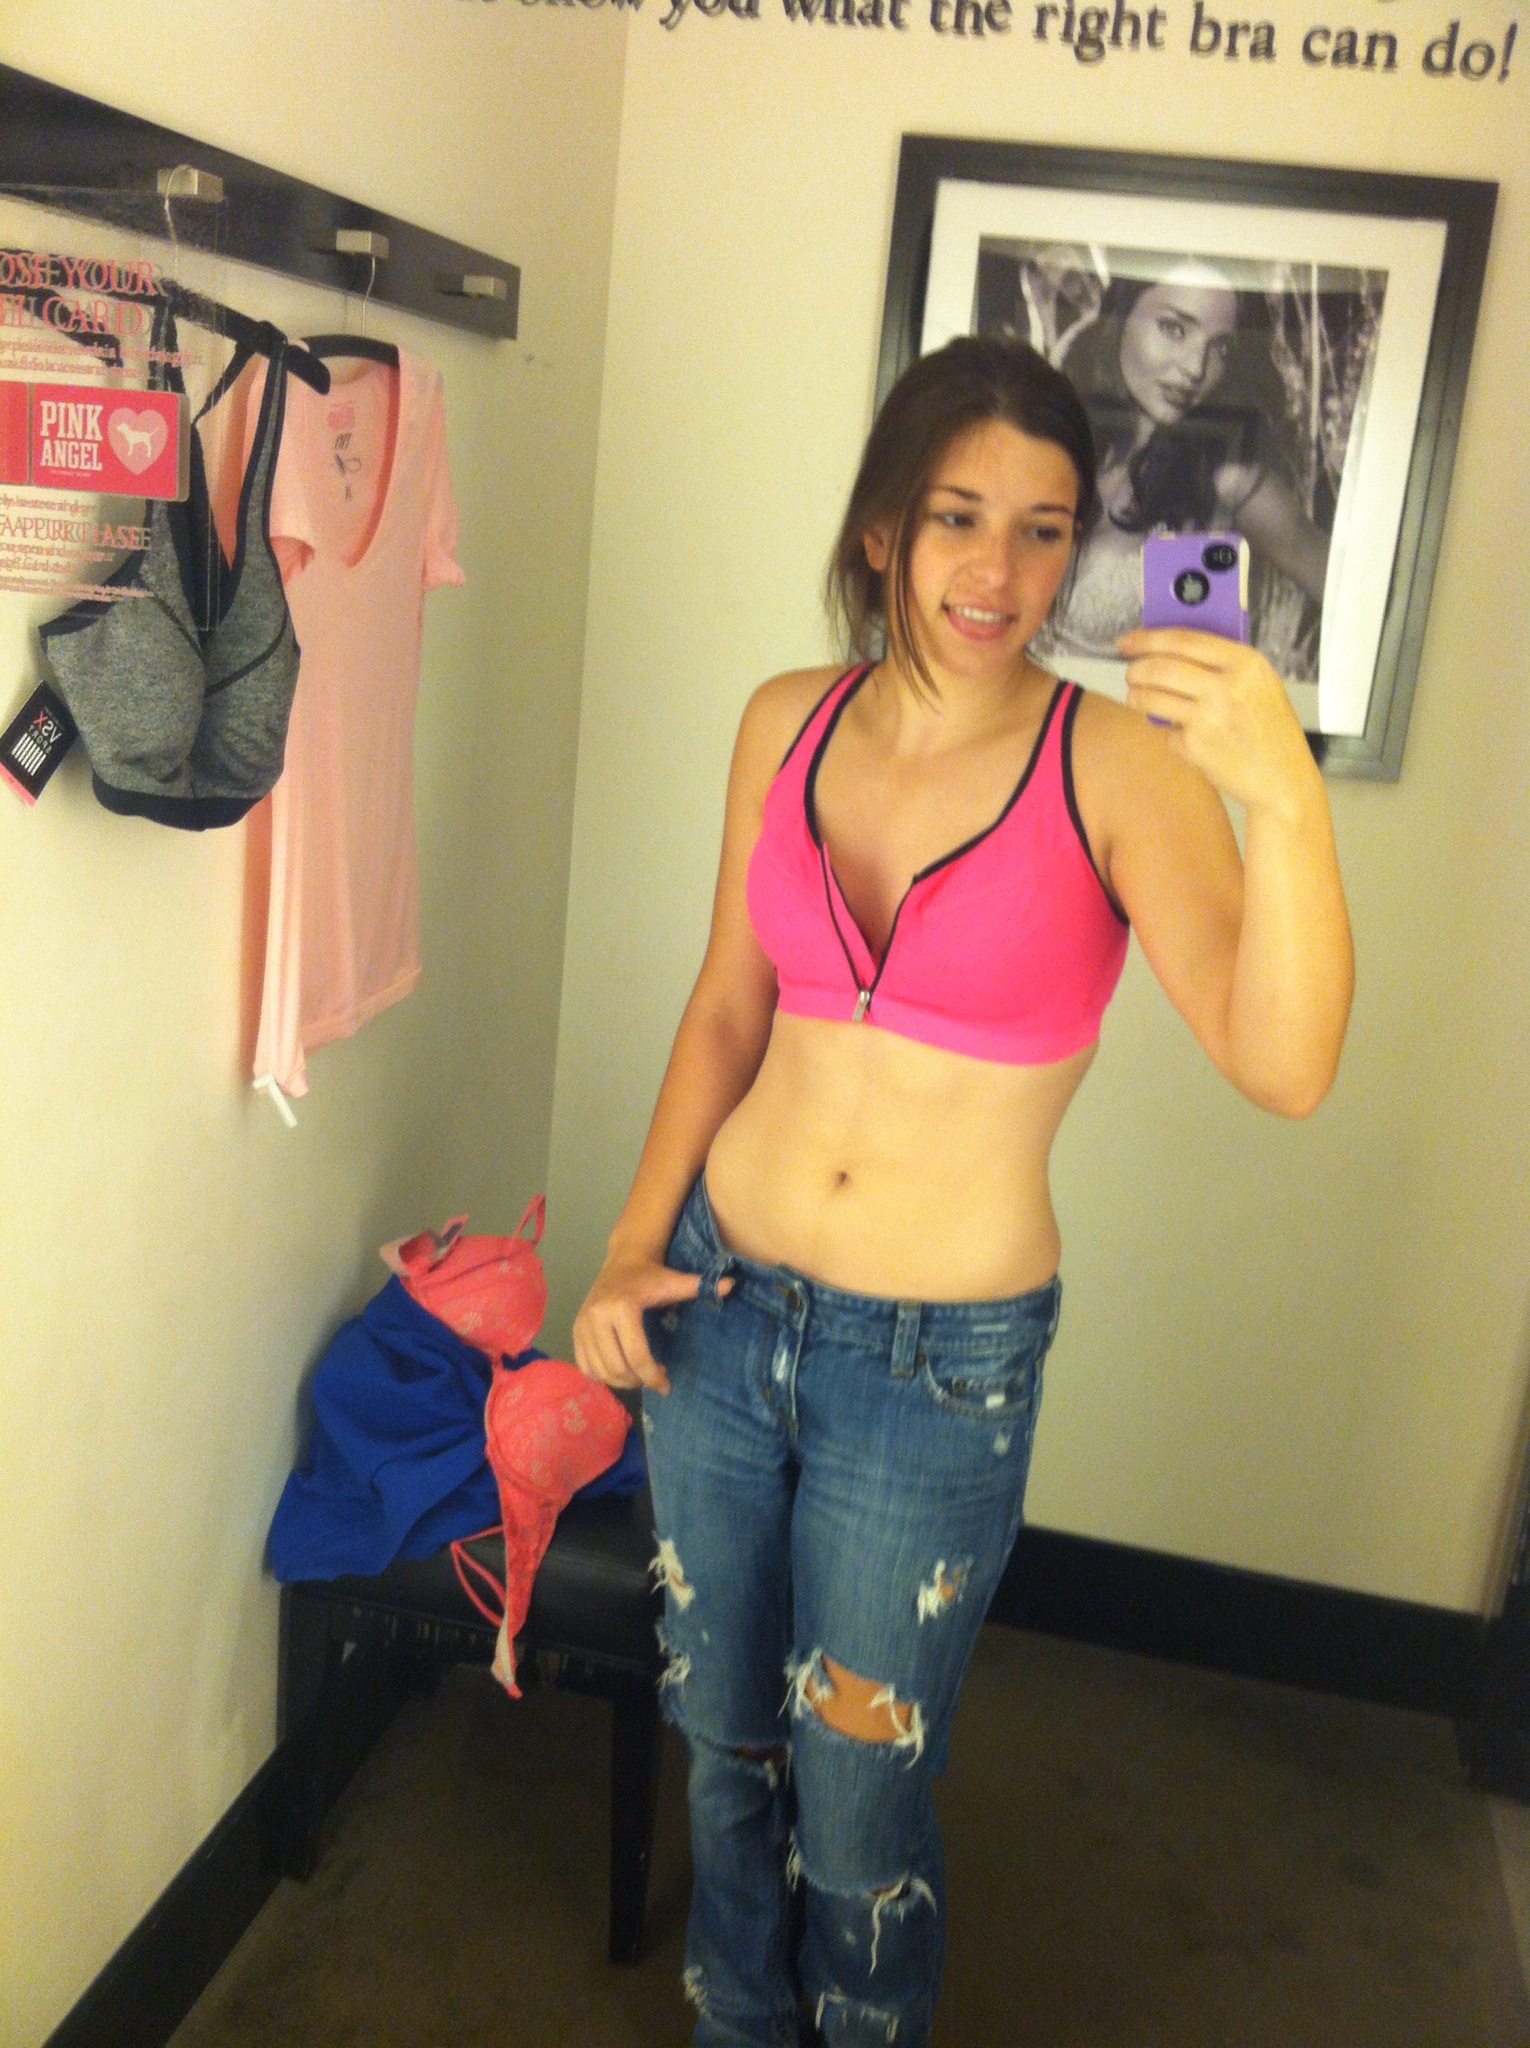 Confidence In A Victoria S Secret Fitting Room Fysicalphitness